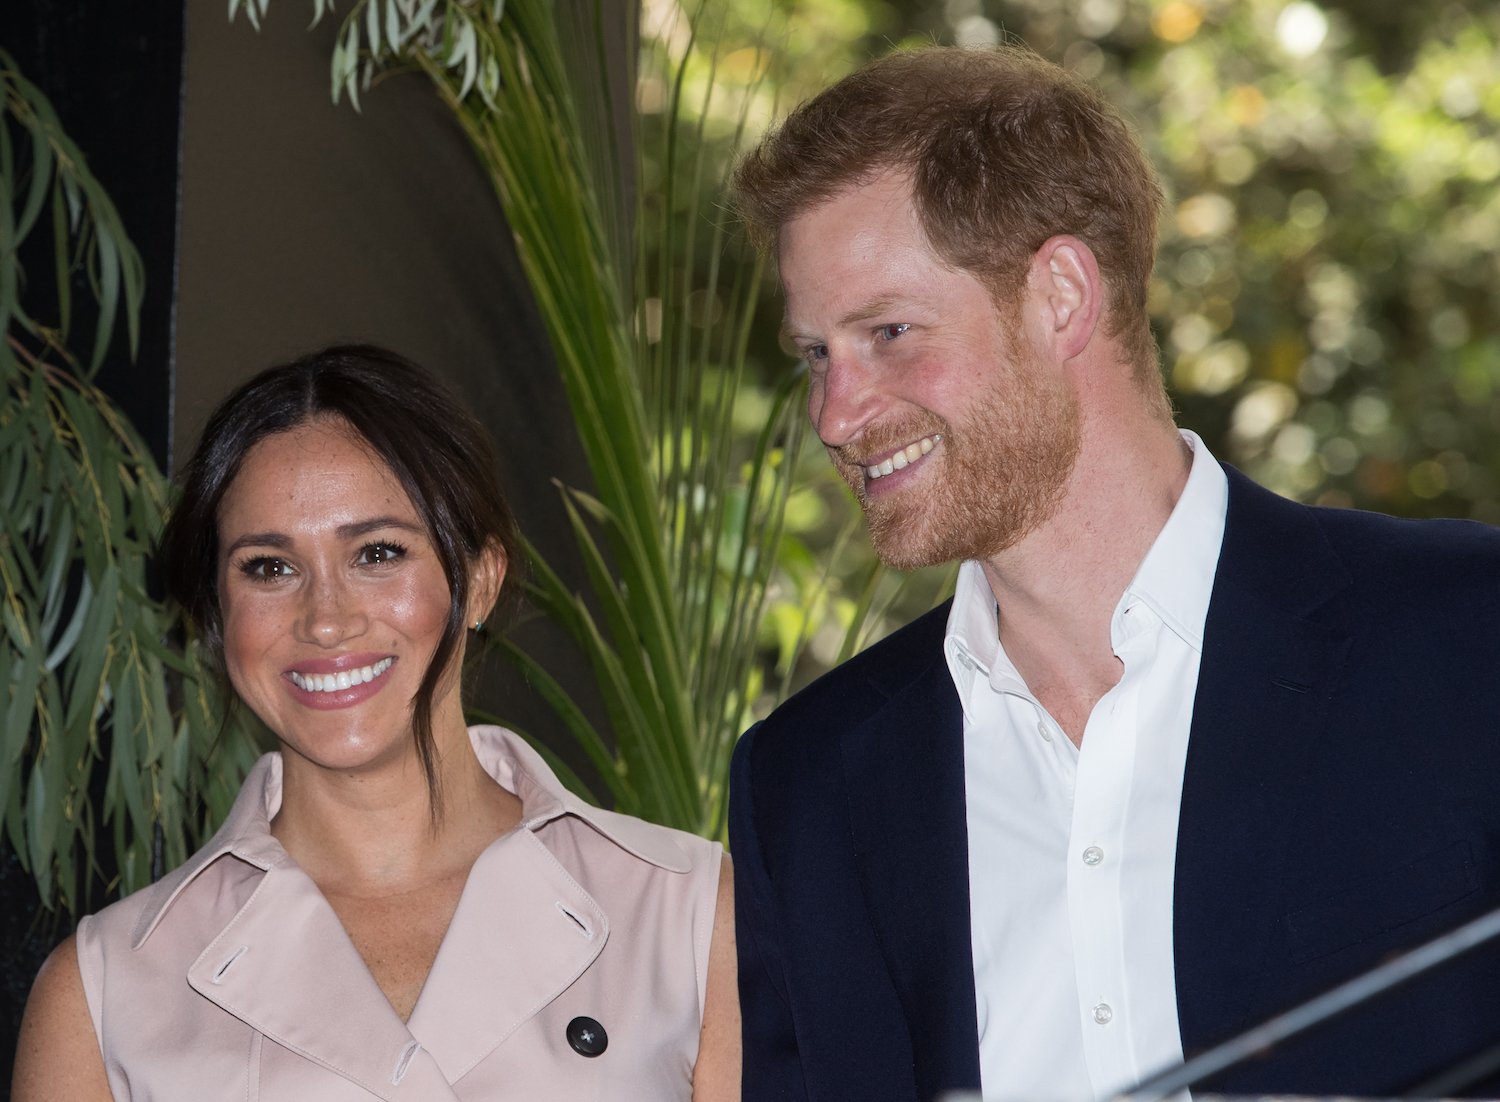 Meghan Markle and Prince Harry at a business reception at the British High Commissioner’s Residence in  Johannesburg, South Africa